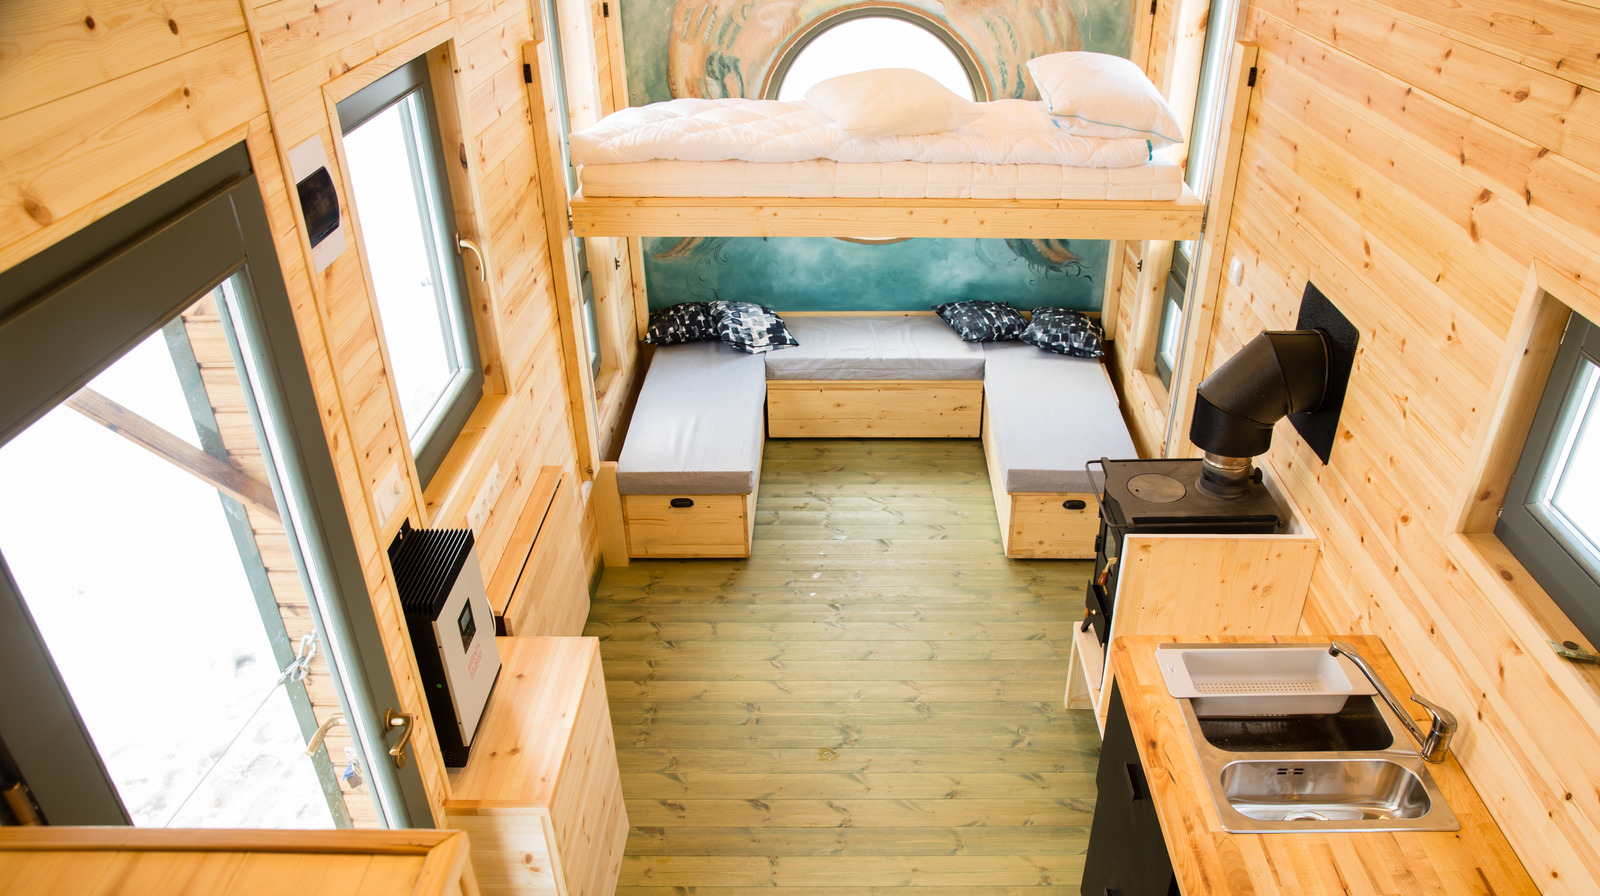 Portable Cabins With Porches Near You | Deluxe Porch Cabins